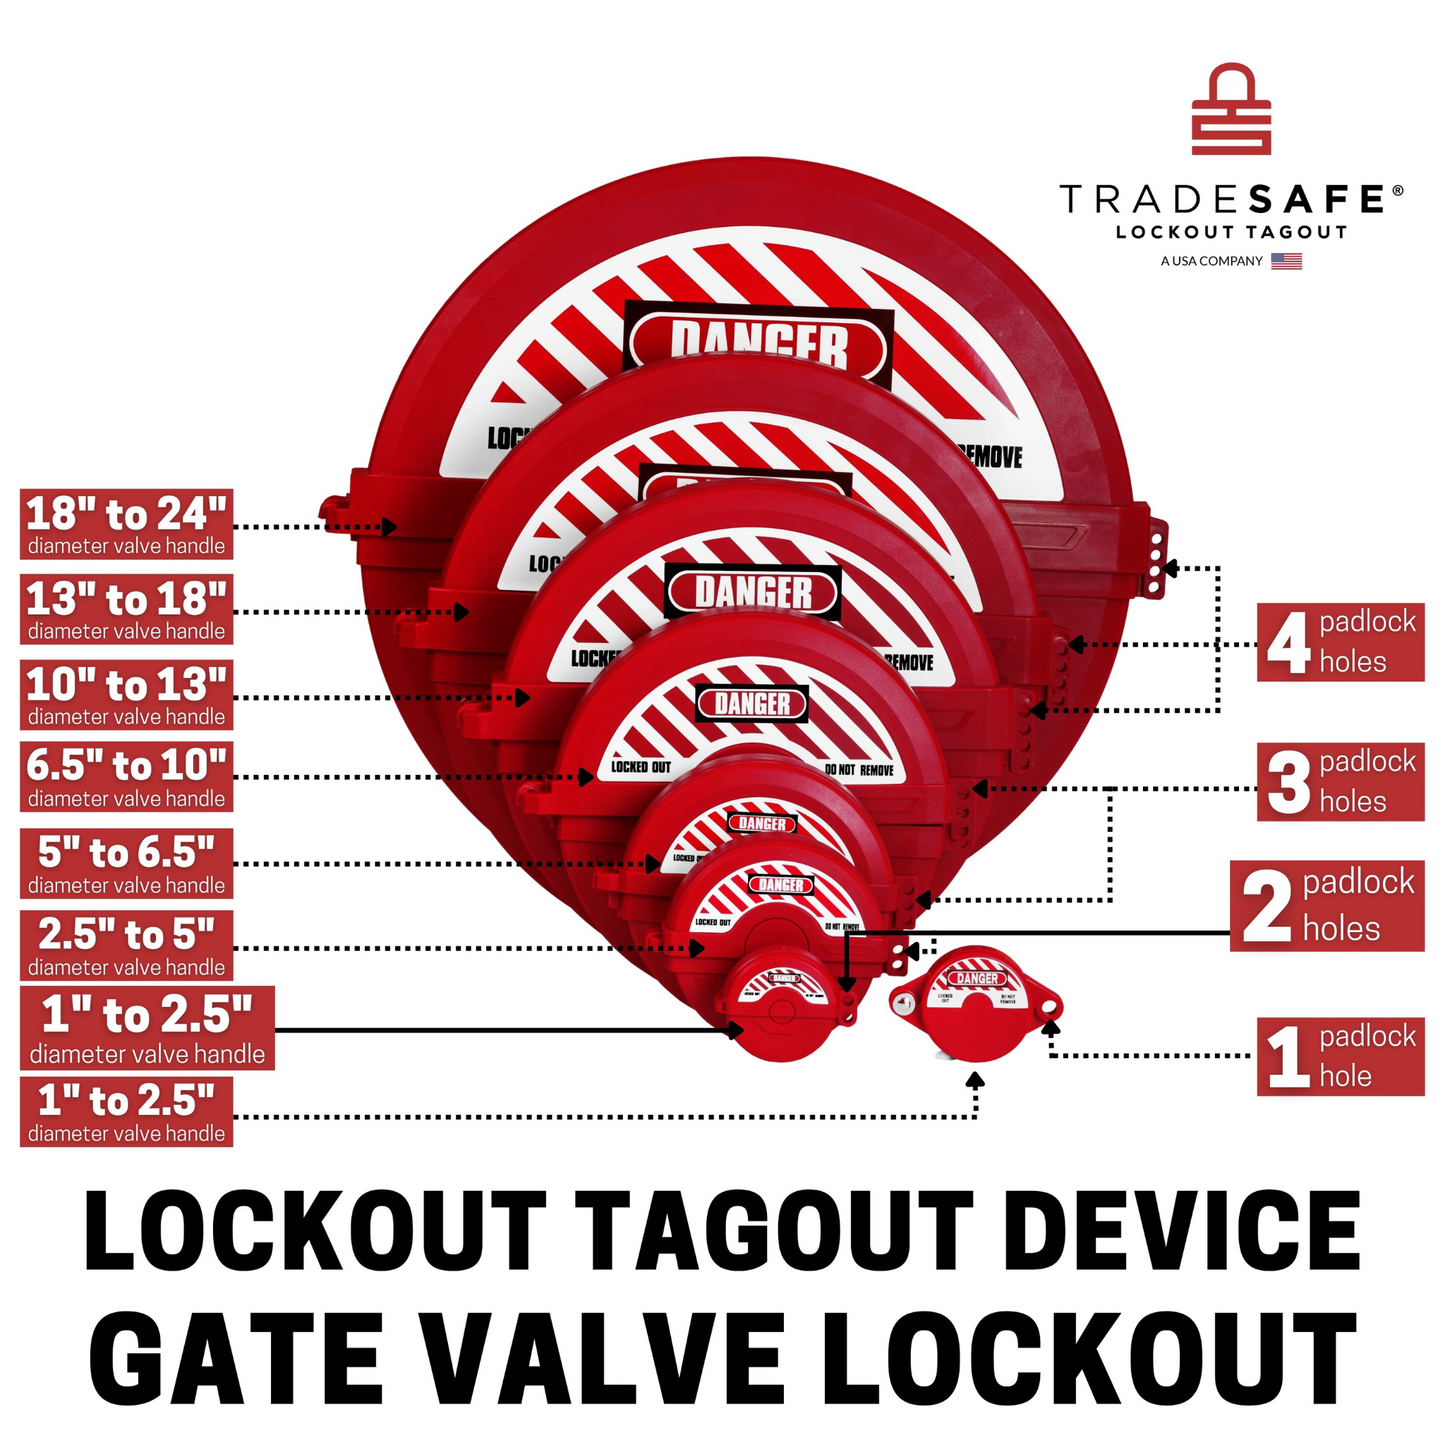 illustration of eight red gate valve lockouts in different sizes indicating the size of the diameter valve handle that will fit and the number of padlock holes in each